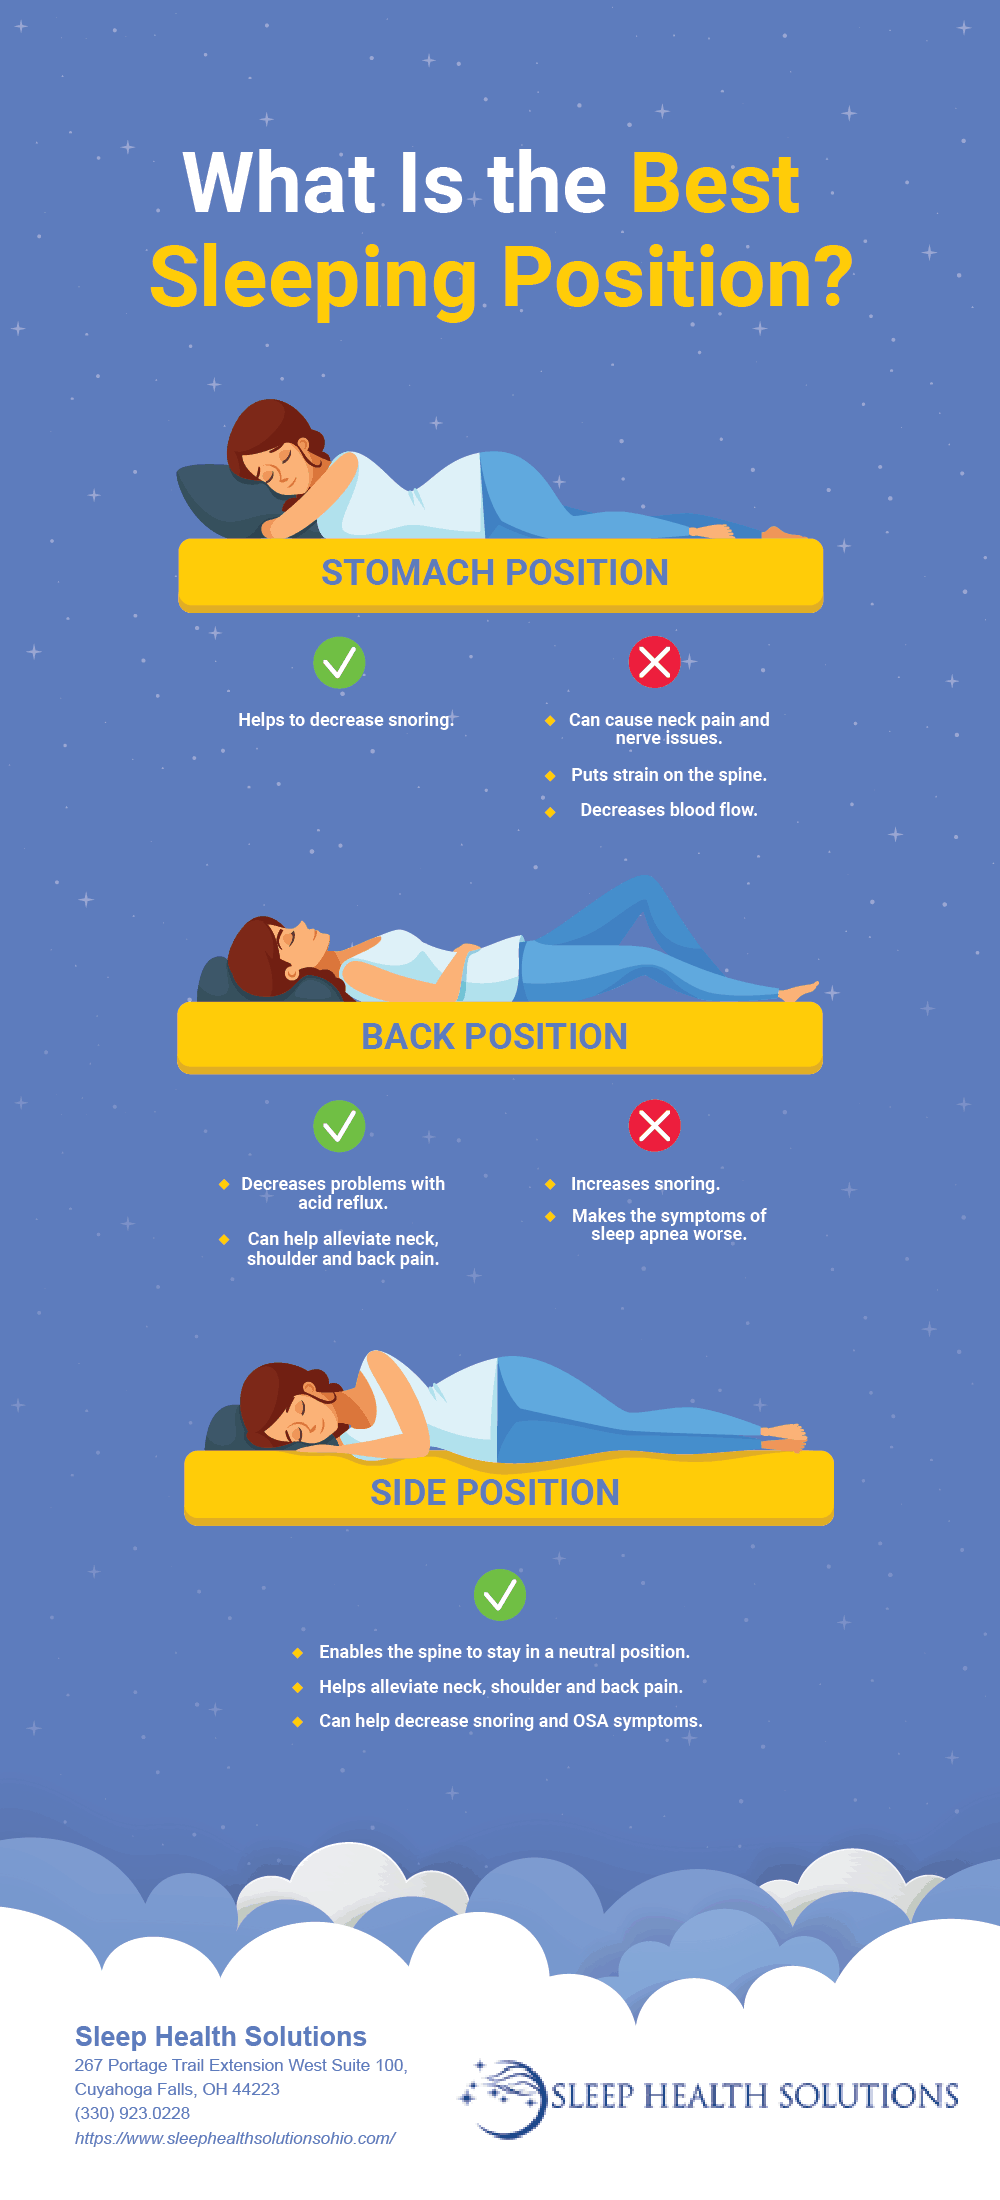 Sleeping Positions Which is Best? Blog Sleep Health Solutions